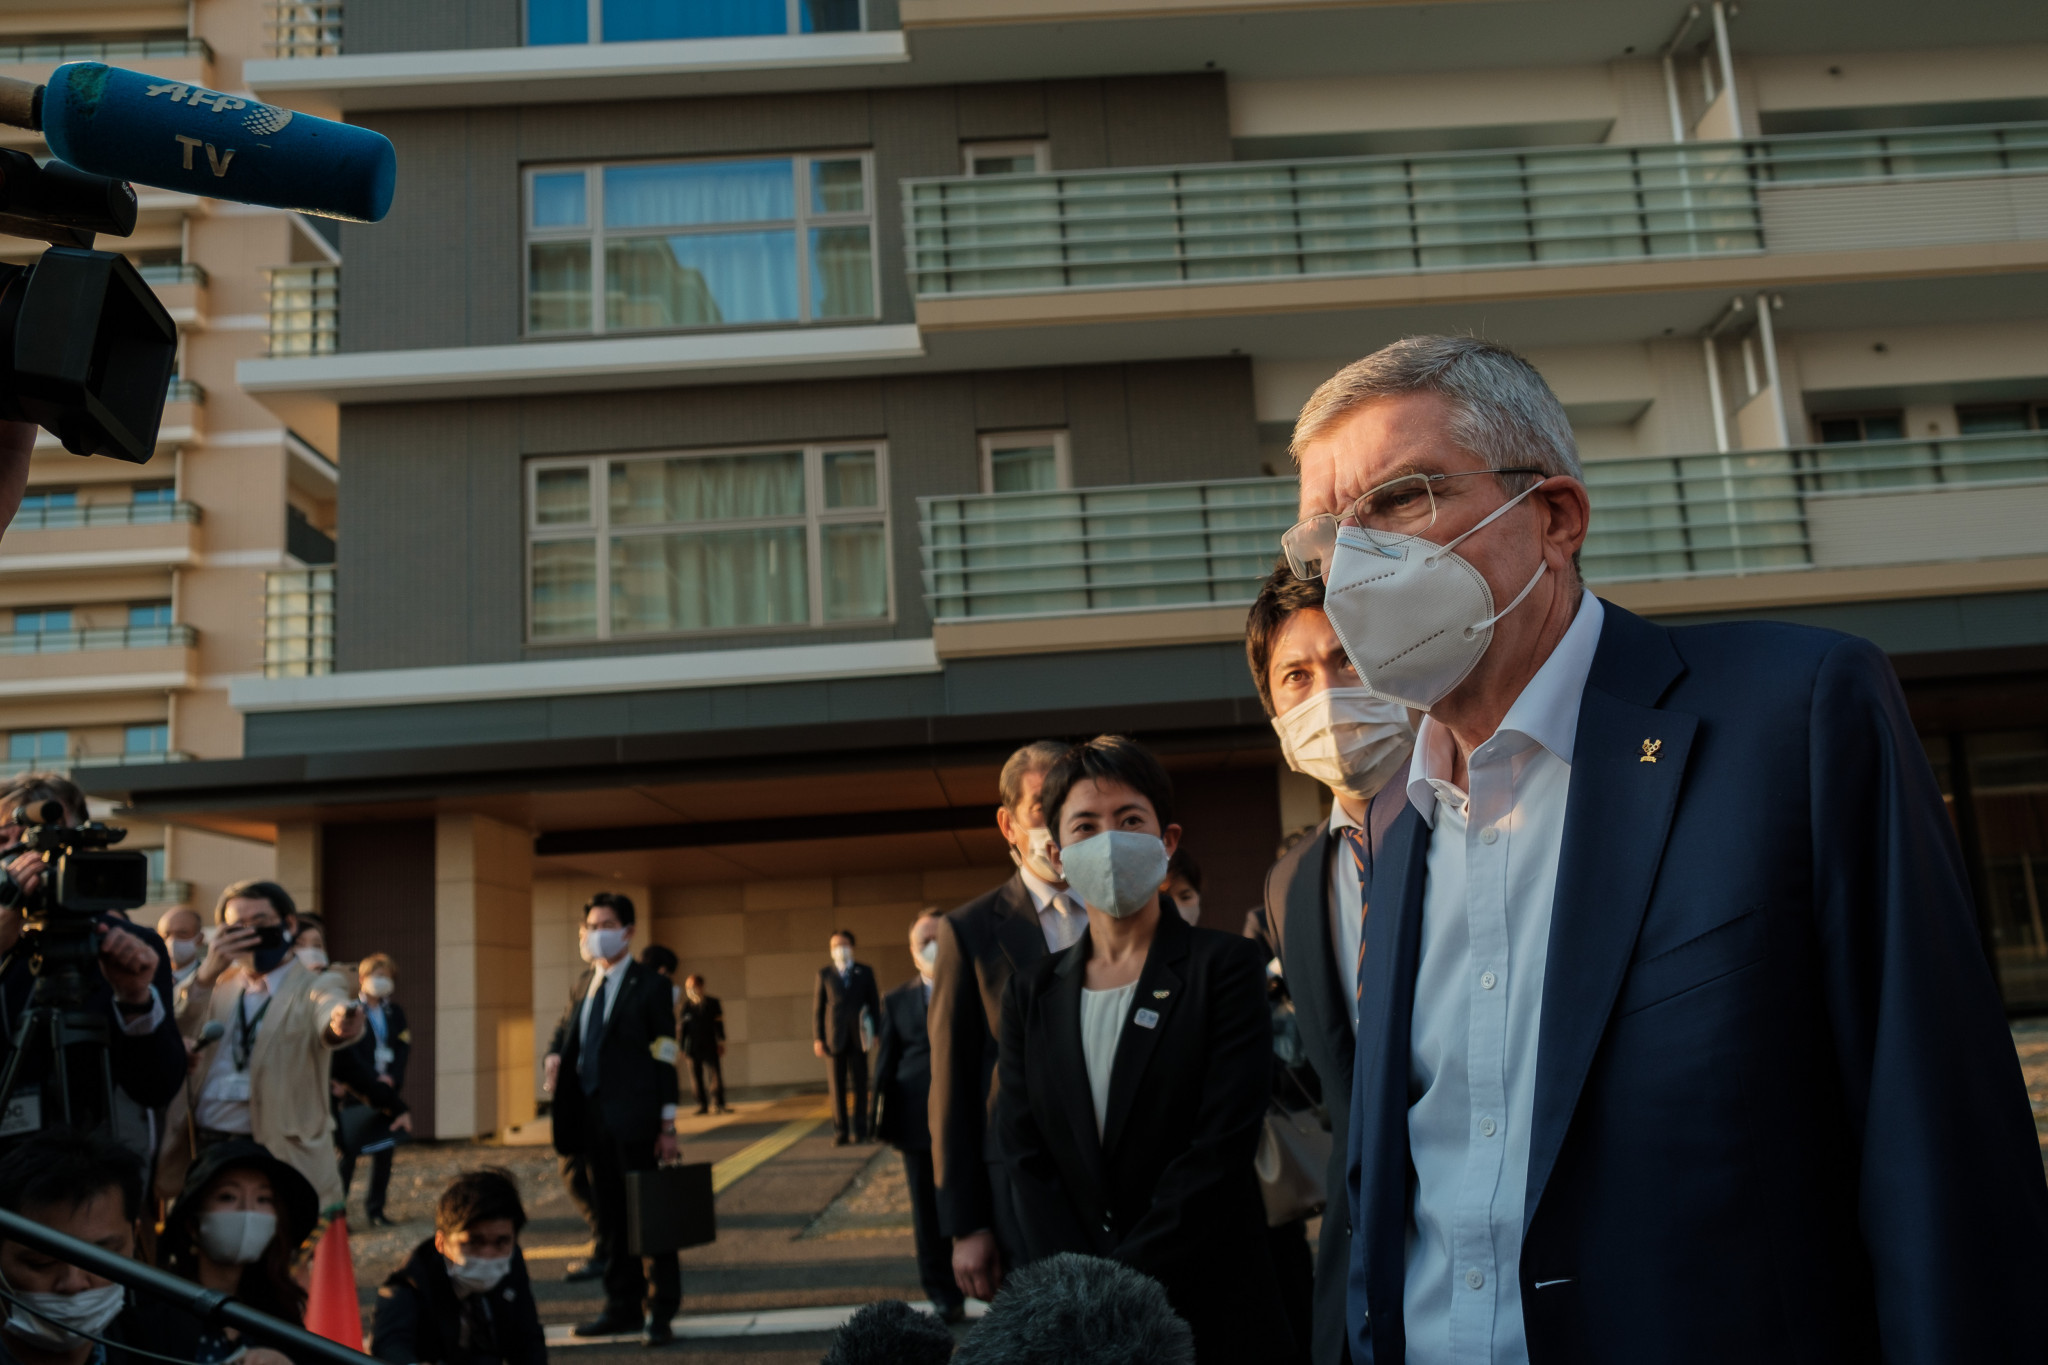 During his recent visit to Tokyo, IOC President Thomas Bach visited the Athletes' Village, where competitors will be encouraged to limit their stay during next year's Games ©Getty Images